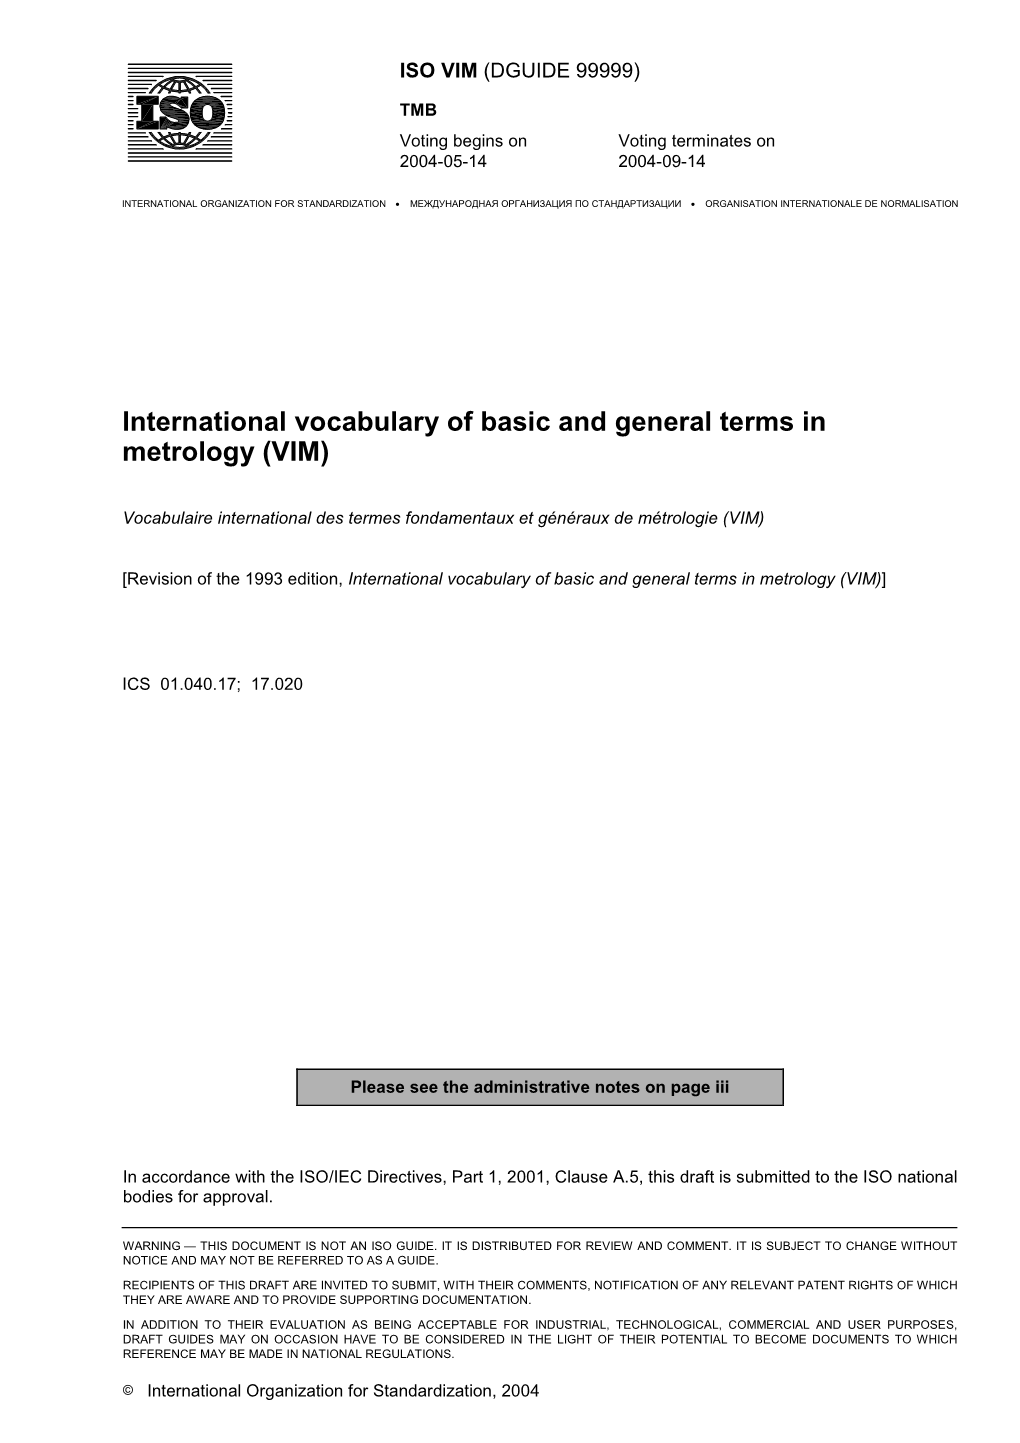 International Vocabulary of Basic and General Terms in Metrology (VIM)